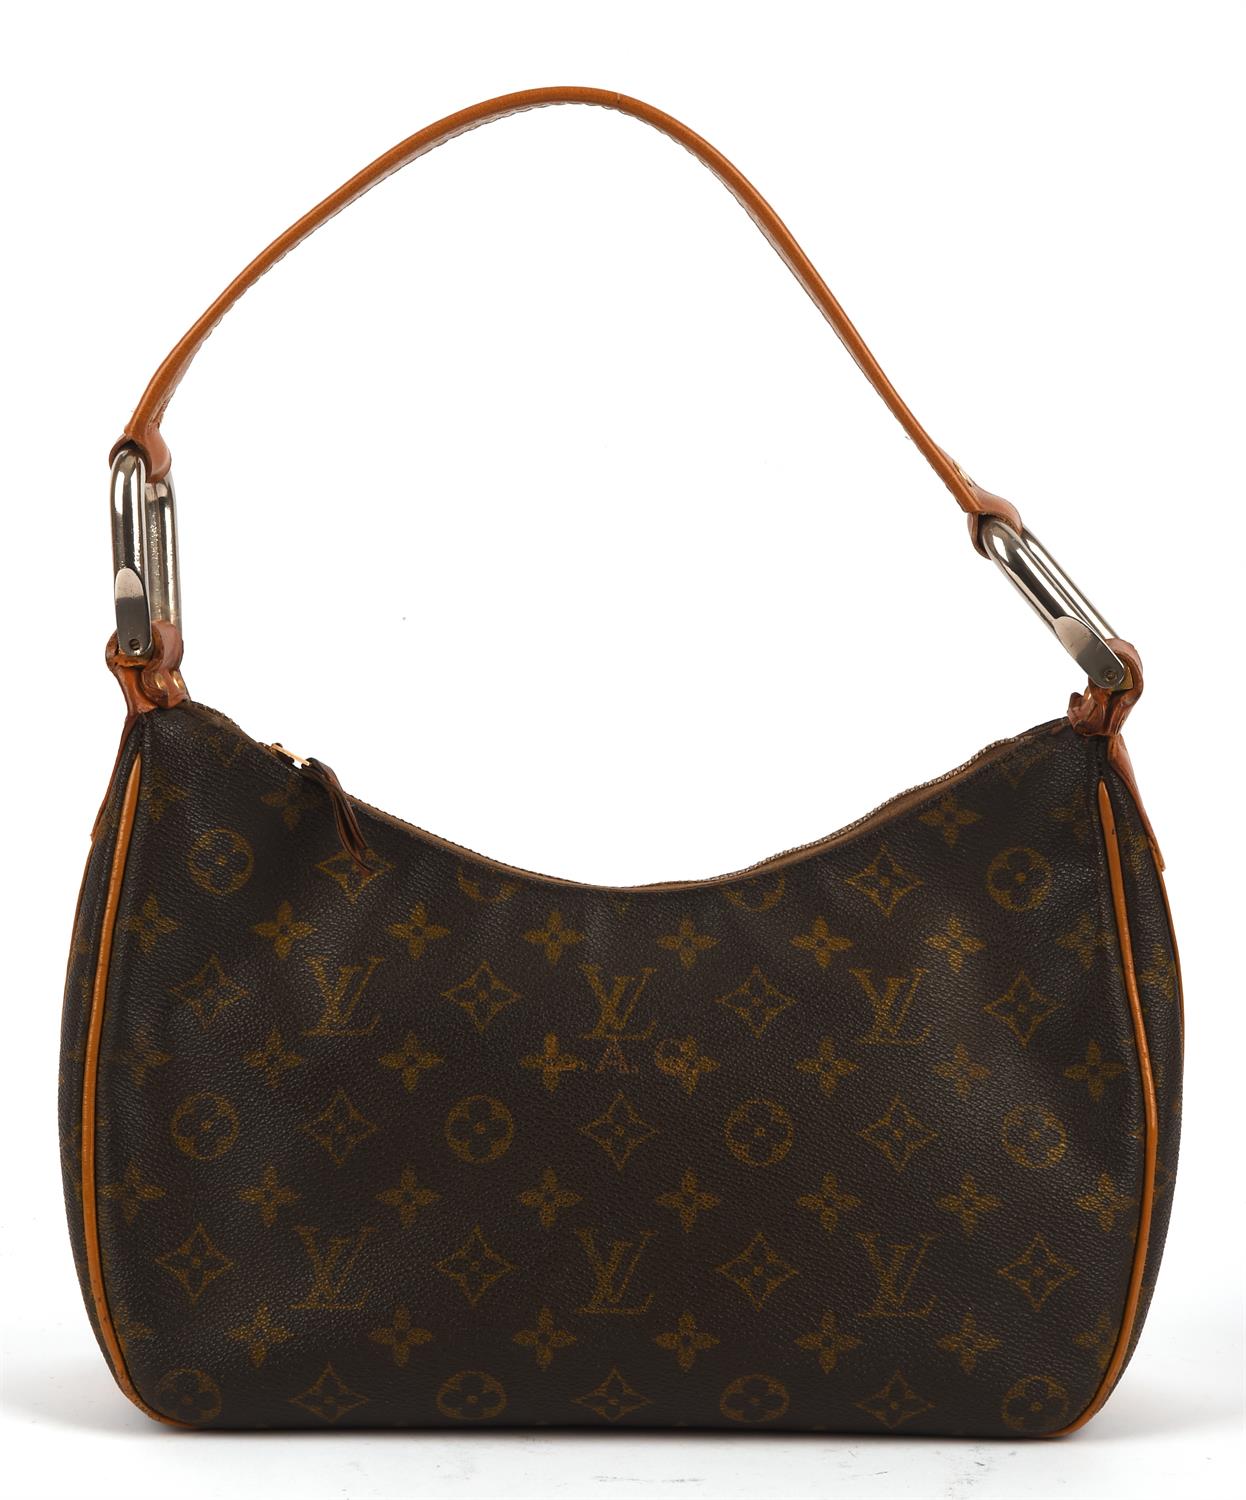 LOUIS VUITTON vintage monogrammed TIKAL style small handbag/ shoulder bag with faded initials AG on